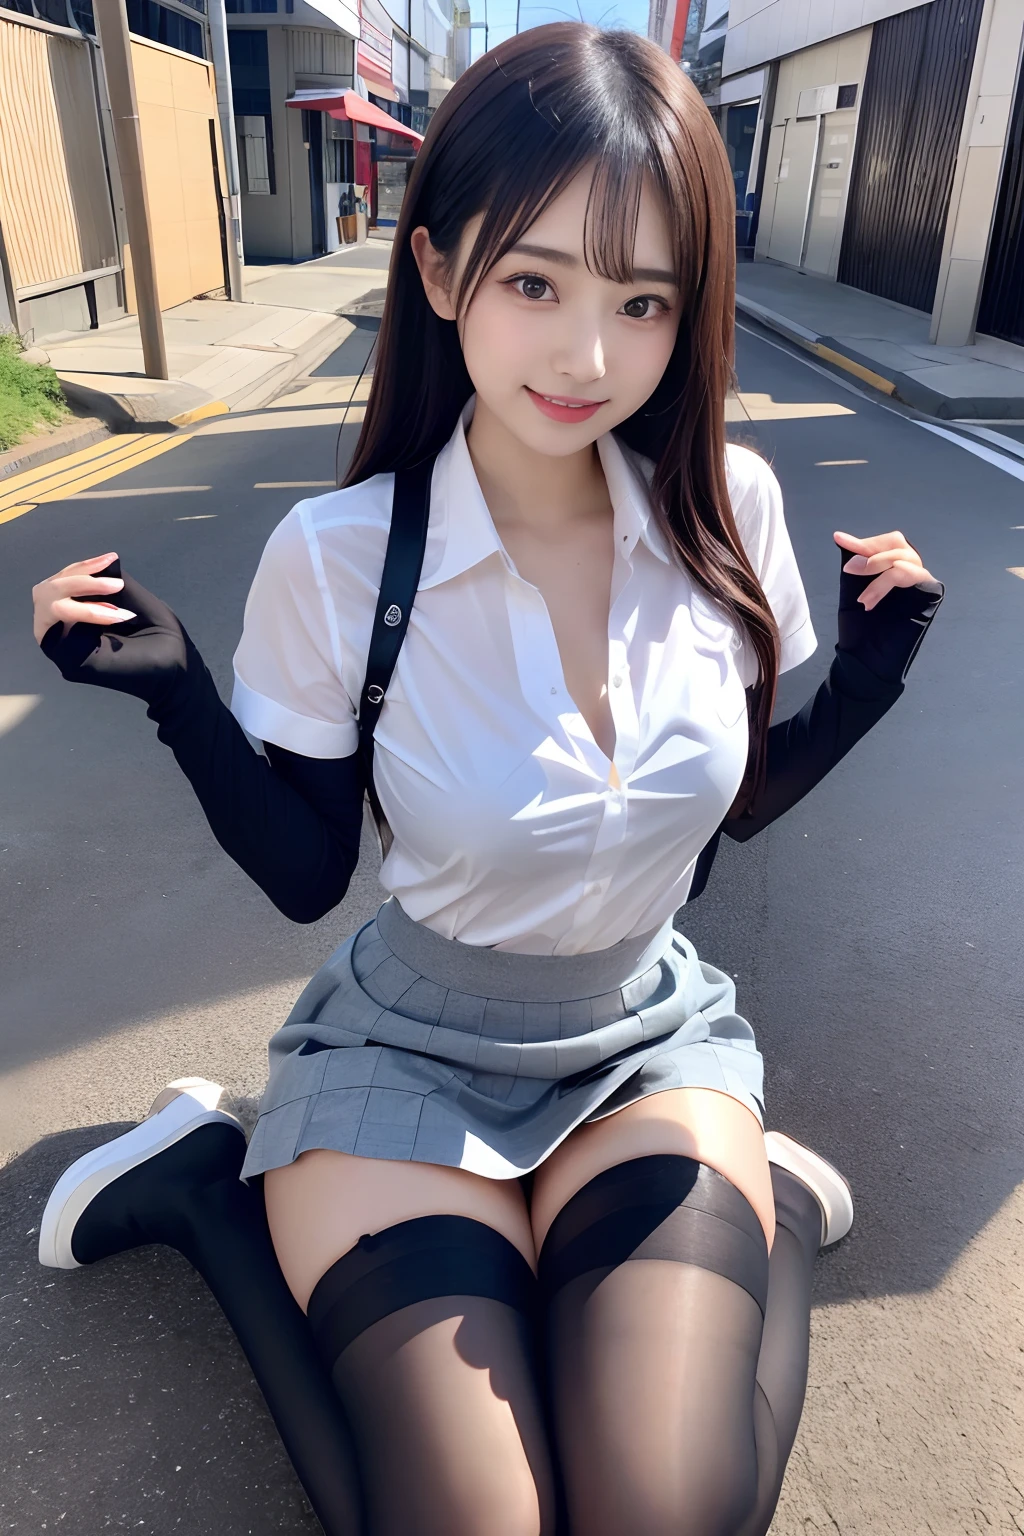 Two 20-year-old women、high-angle shot、Center view、((Shiny shirt、pleatedskirt))、Two arafe asian women in satin shimmies standing in the city、Phenomenally cute girl、japanaese girl、Wearing a lace slip shimmy、a hyperrealistic schoolgirl、a hyperrealistic 、 Pose、full body Esbian、Nice skin、glistning skin、lovely thighs、glowing thigh、shining legs、Black high socks above the knee、High School in Japan 、Nogizaka Idol、Korean Idol、Invite you inside、Inviting eyes、((Black stockings))